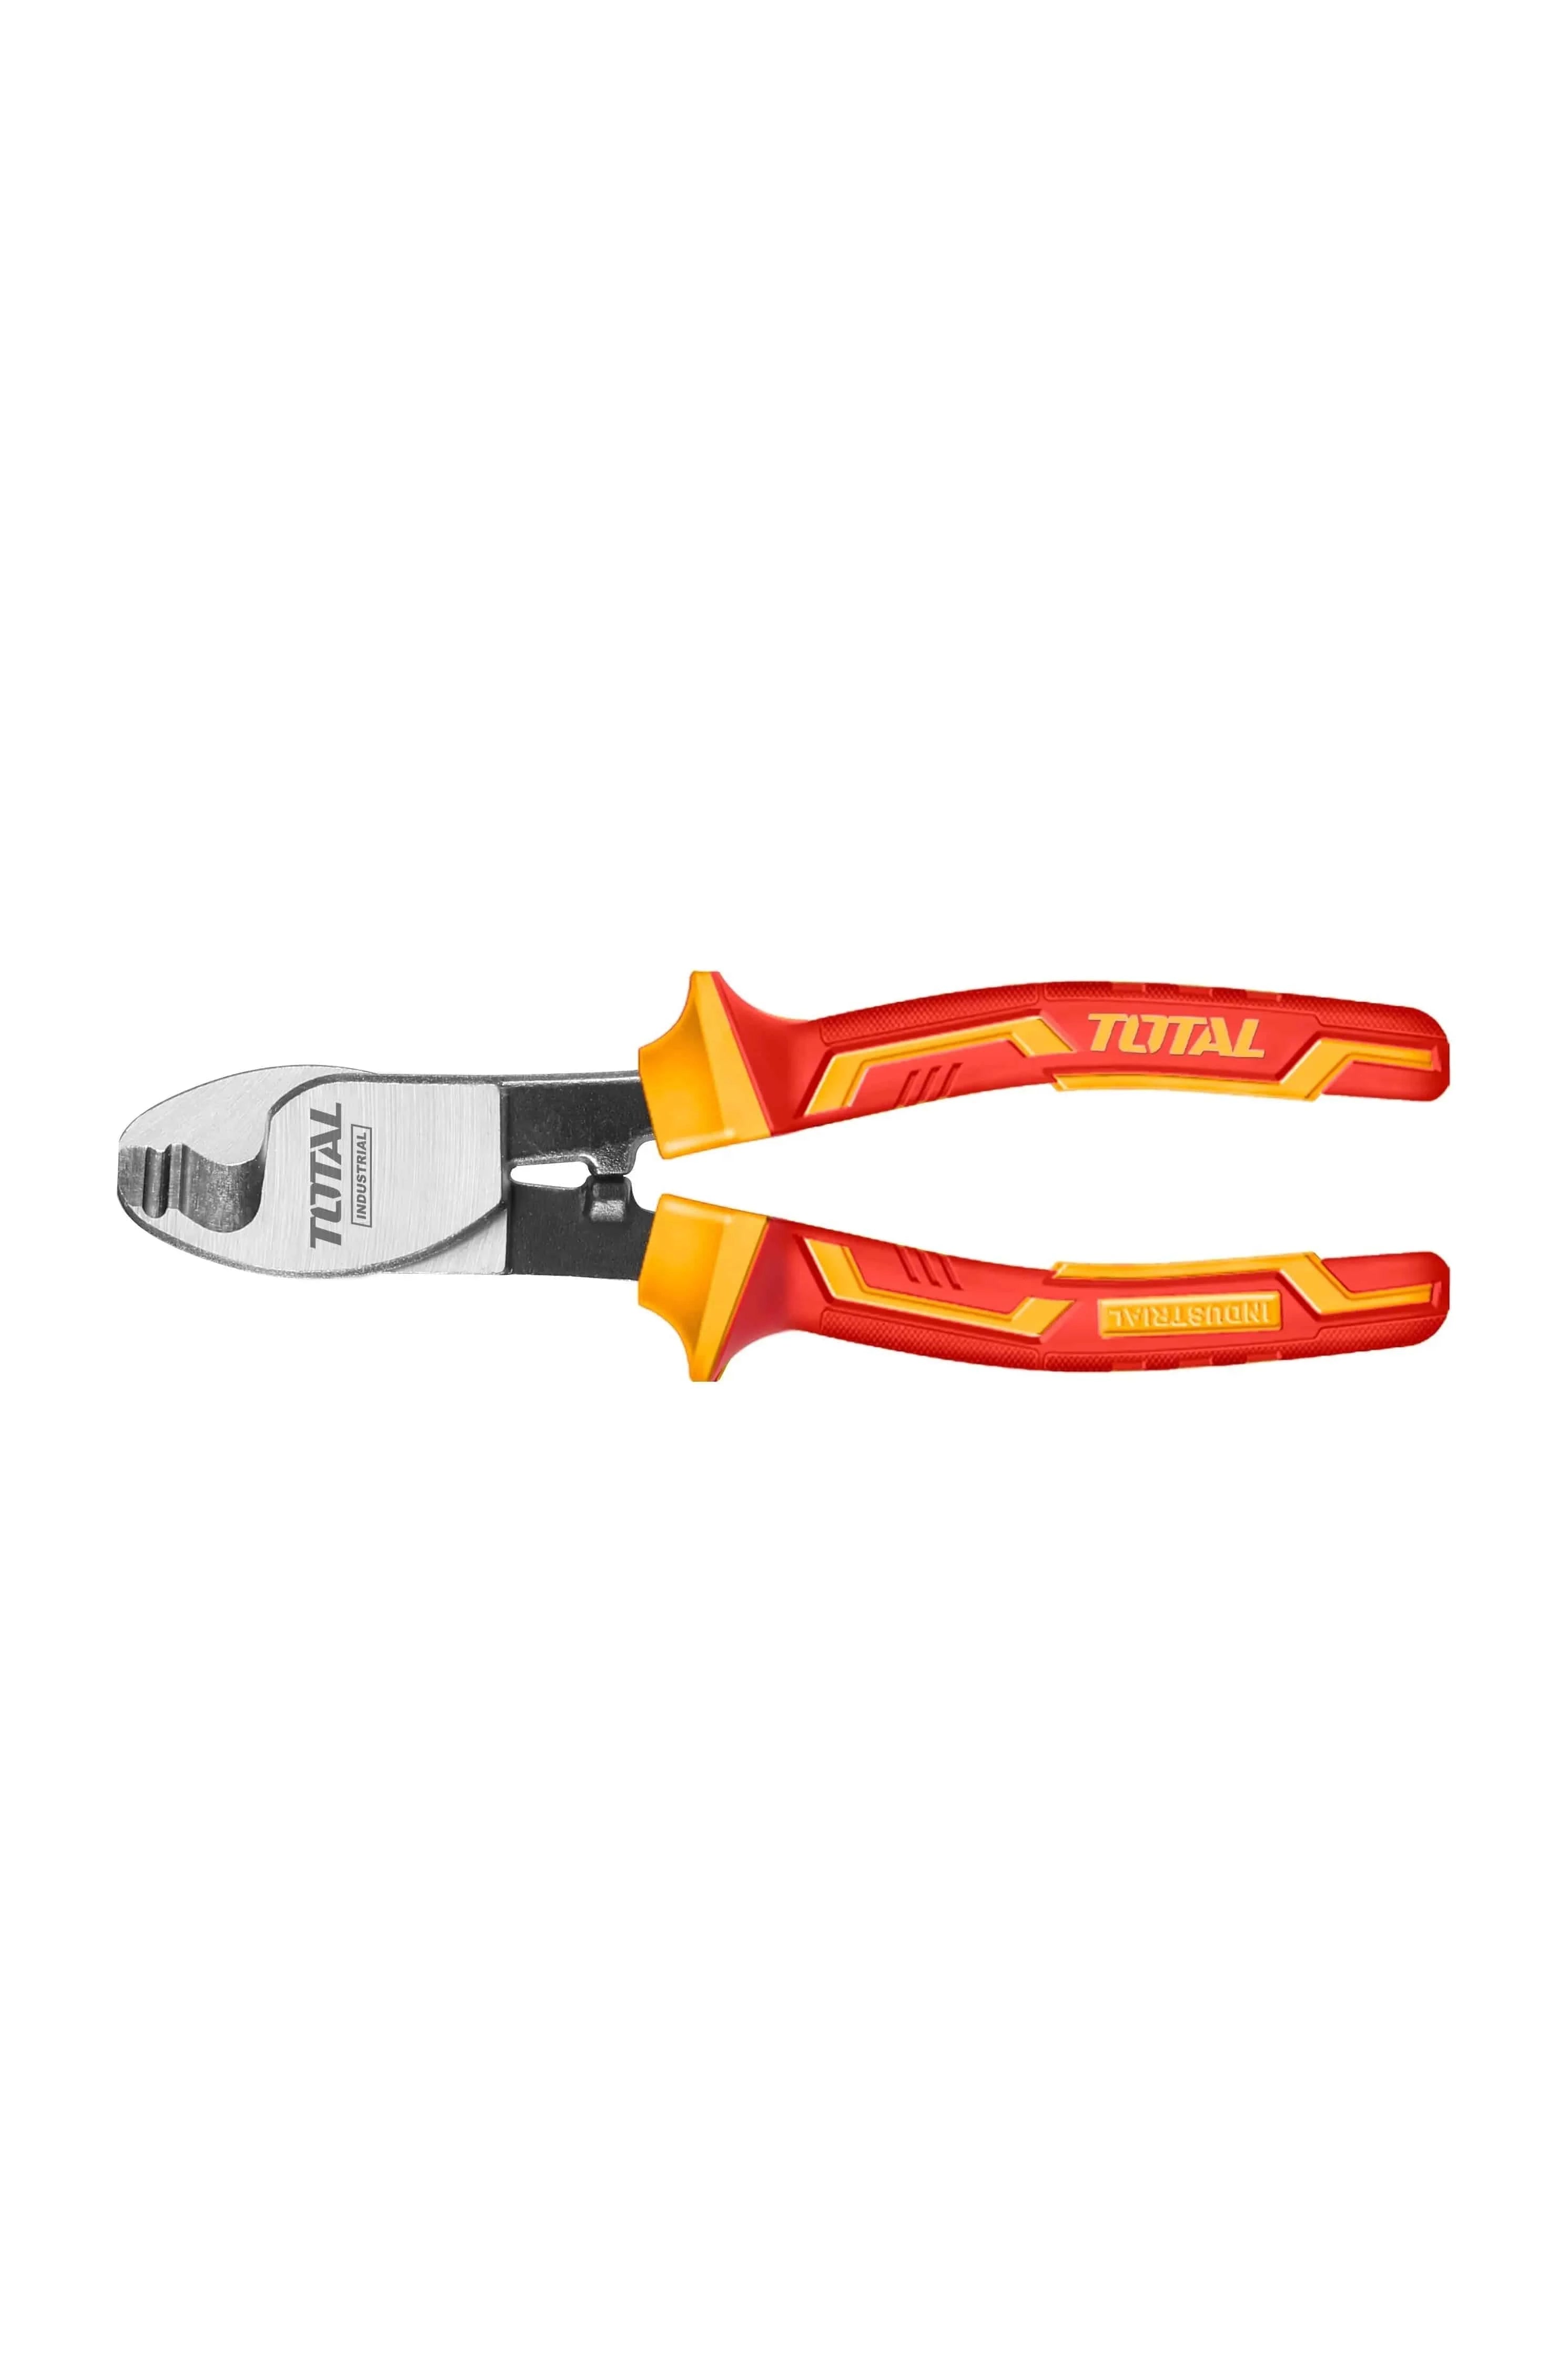 TOTAL INSULATED CABLE CUTTER - Elite Renewable Solutions